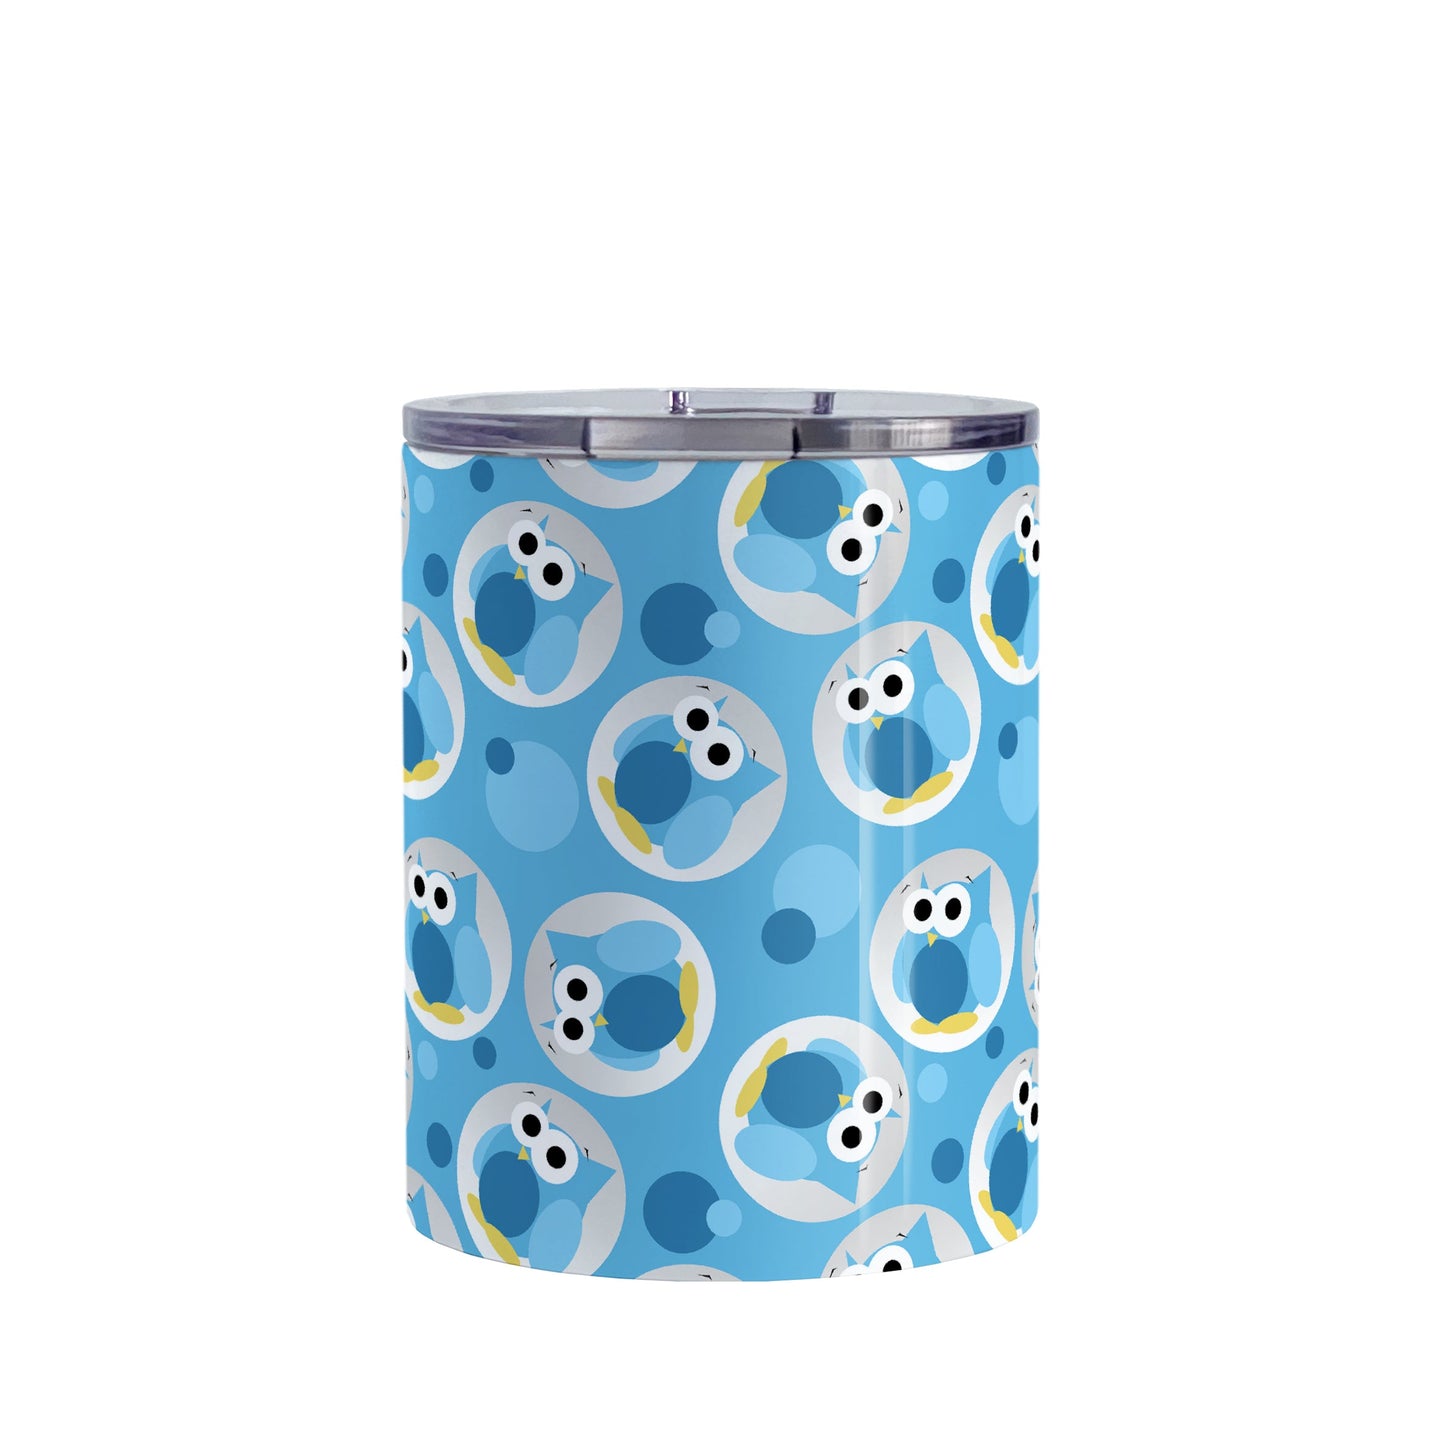 Funny Cute Blue Owl Pattern Tumbler Cup (10oz, stainless steel insulated) at Amy's Coffee Mugs